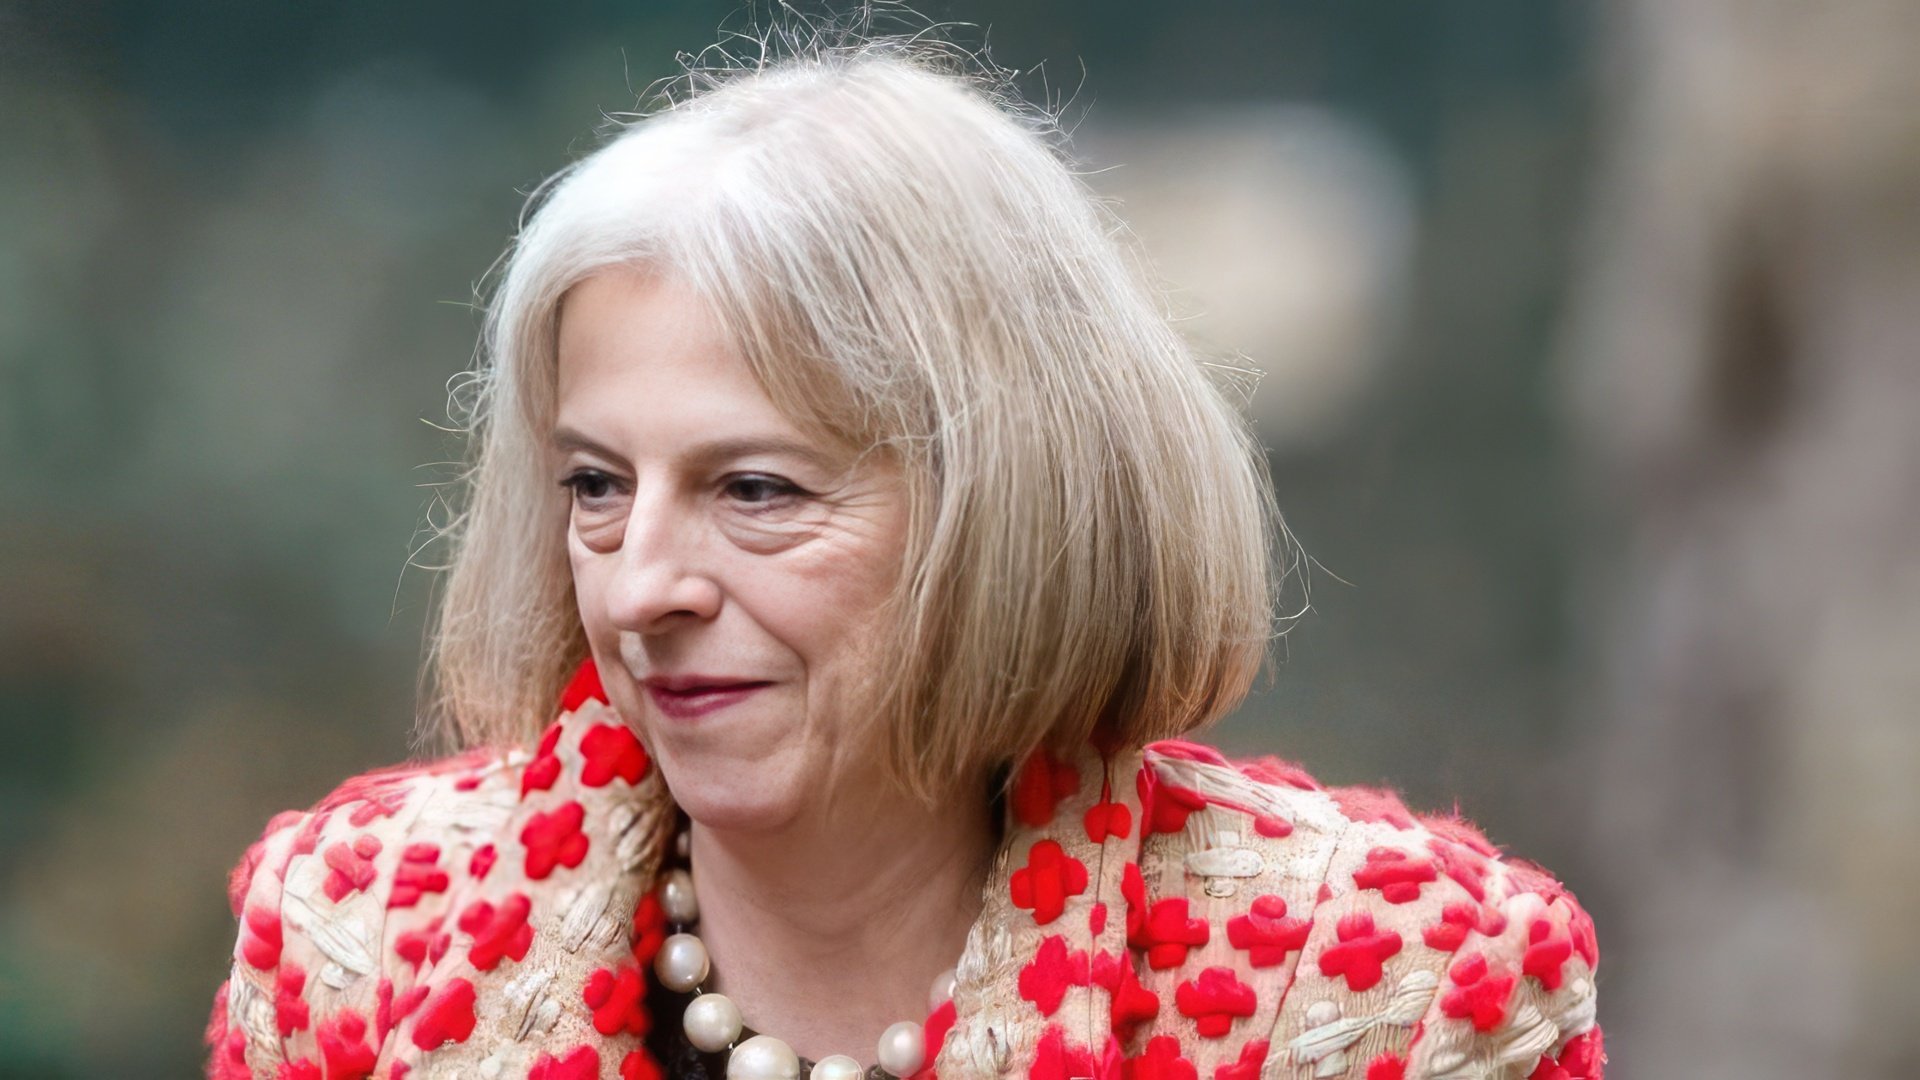 Theresa May was diagnosed with diabetes